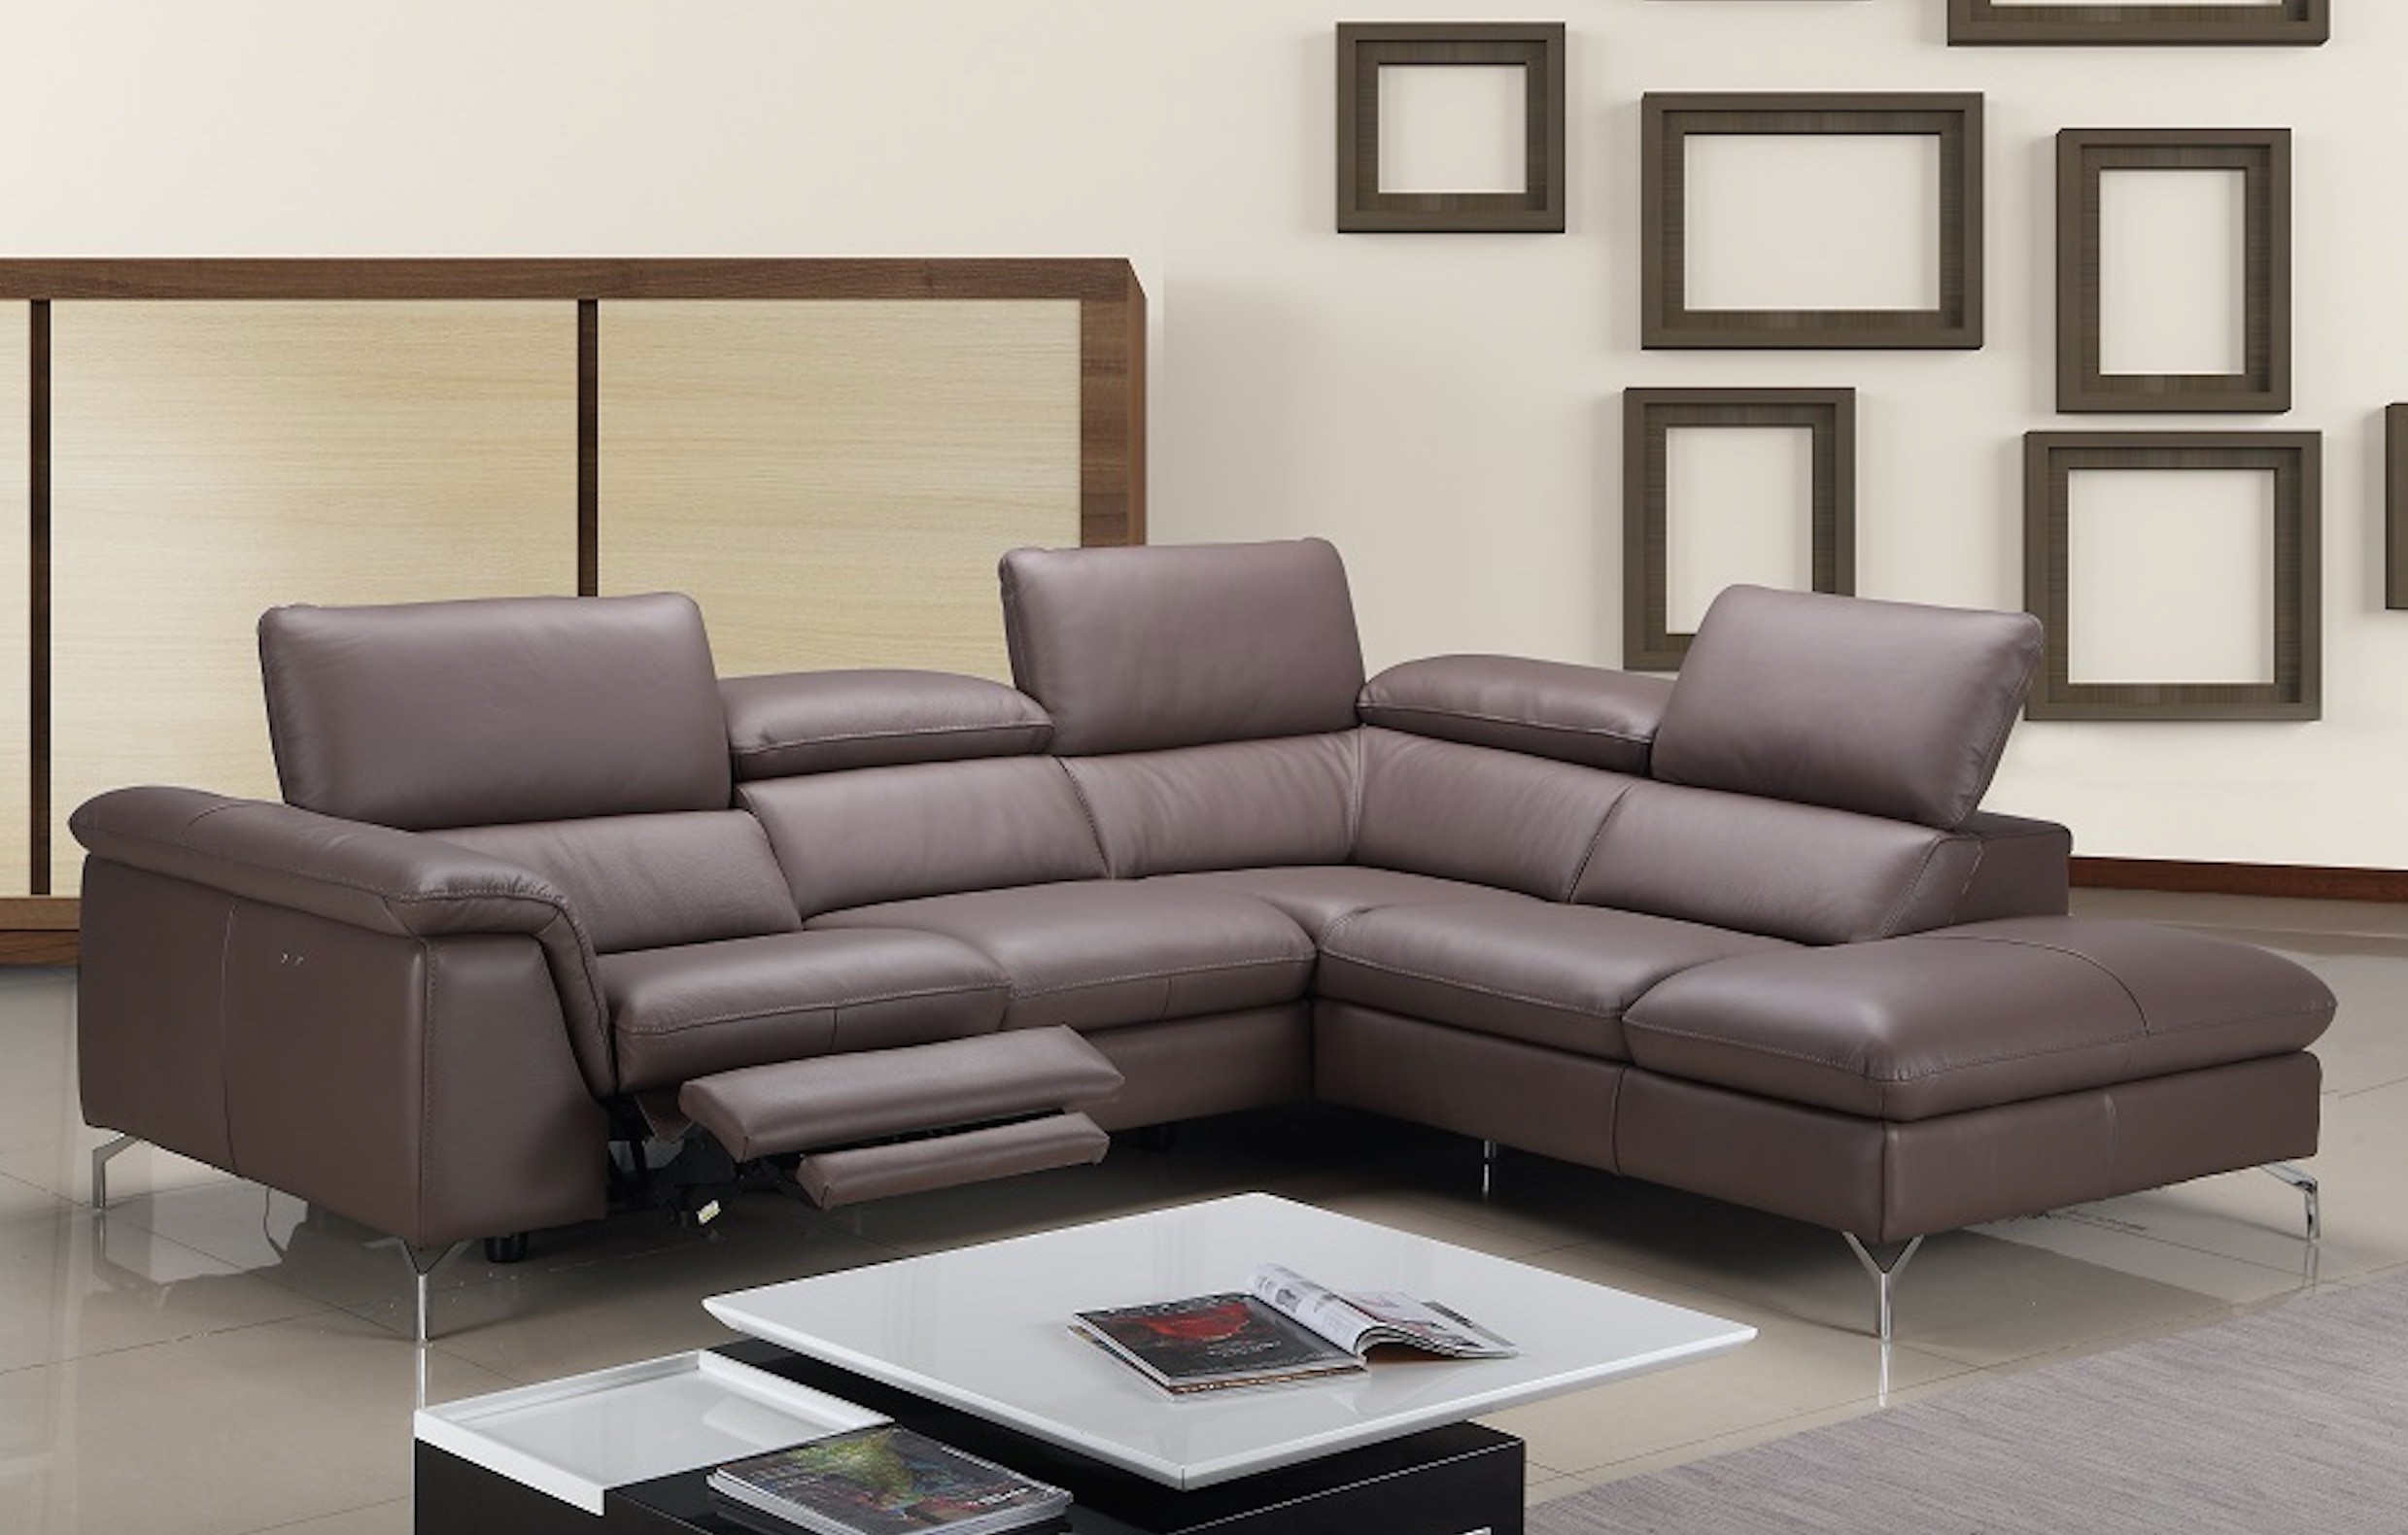 Anastasia Premium Leather Sectional By J&M buy from NOVA interiors